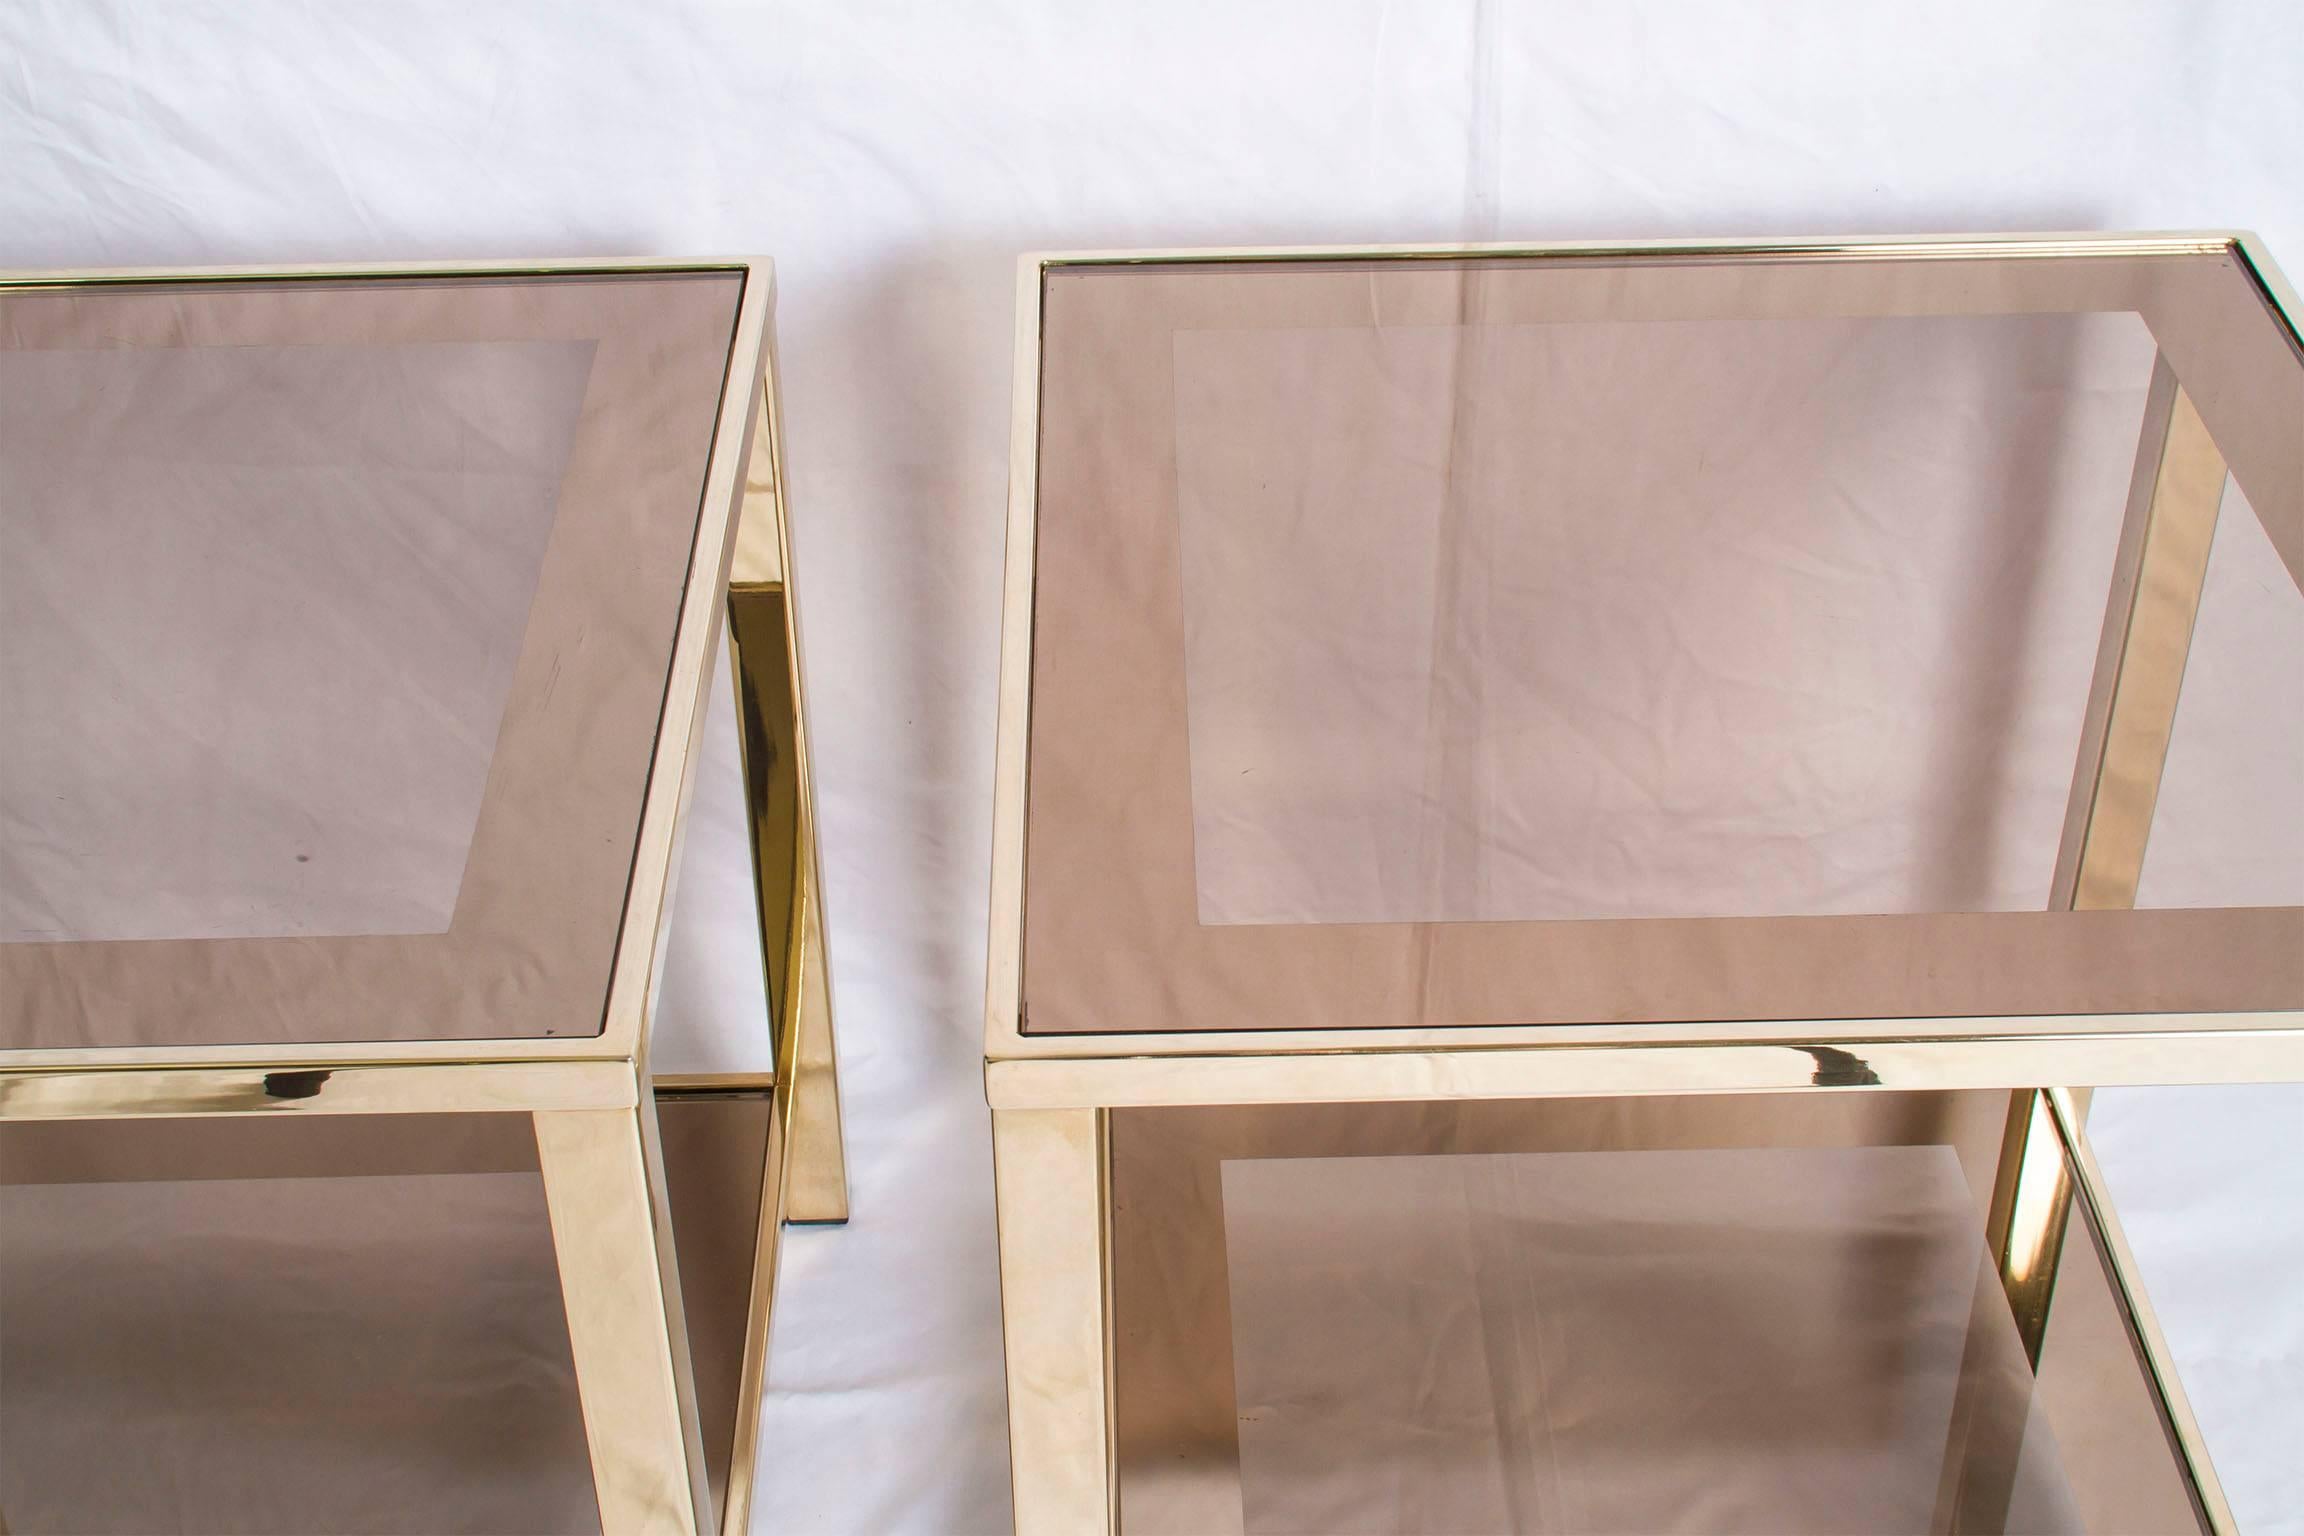 Late 20th Century Pair of Two 23-Carat Gold-Plated Side Tables by Belgo Chrome